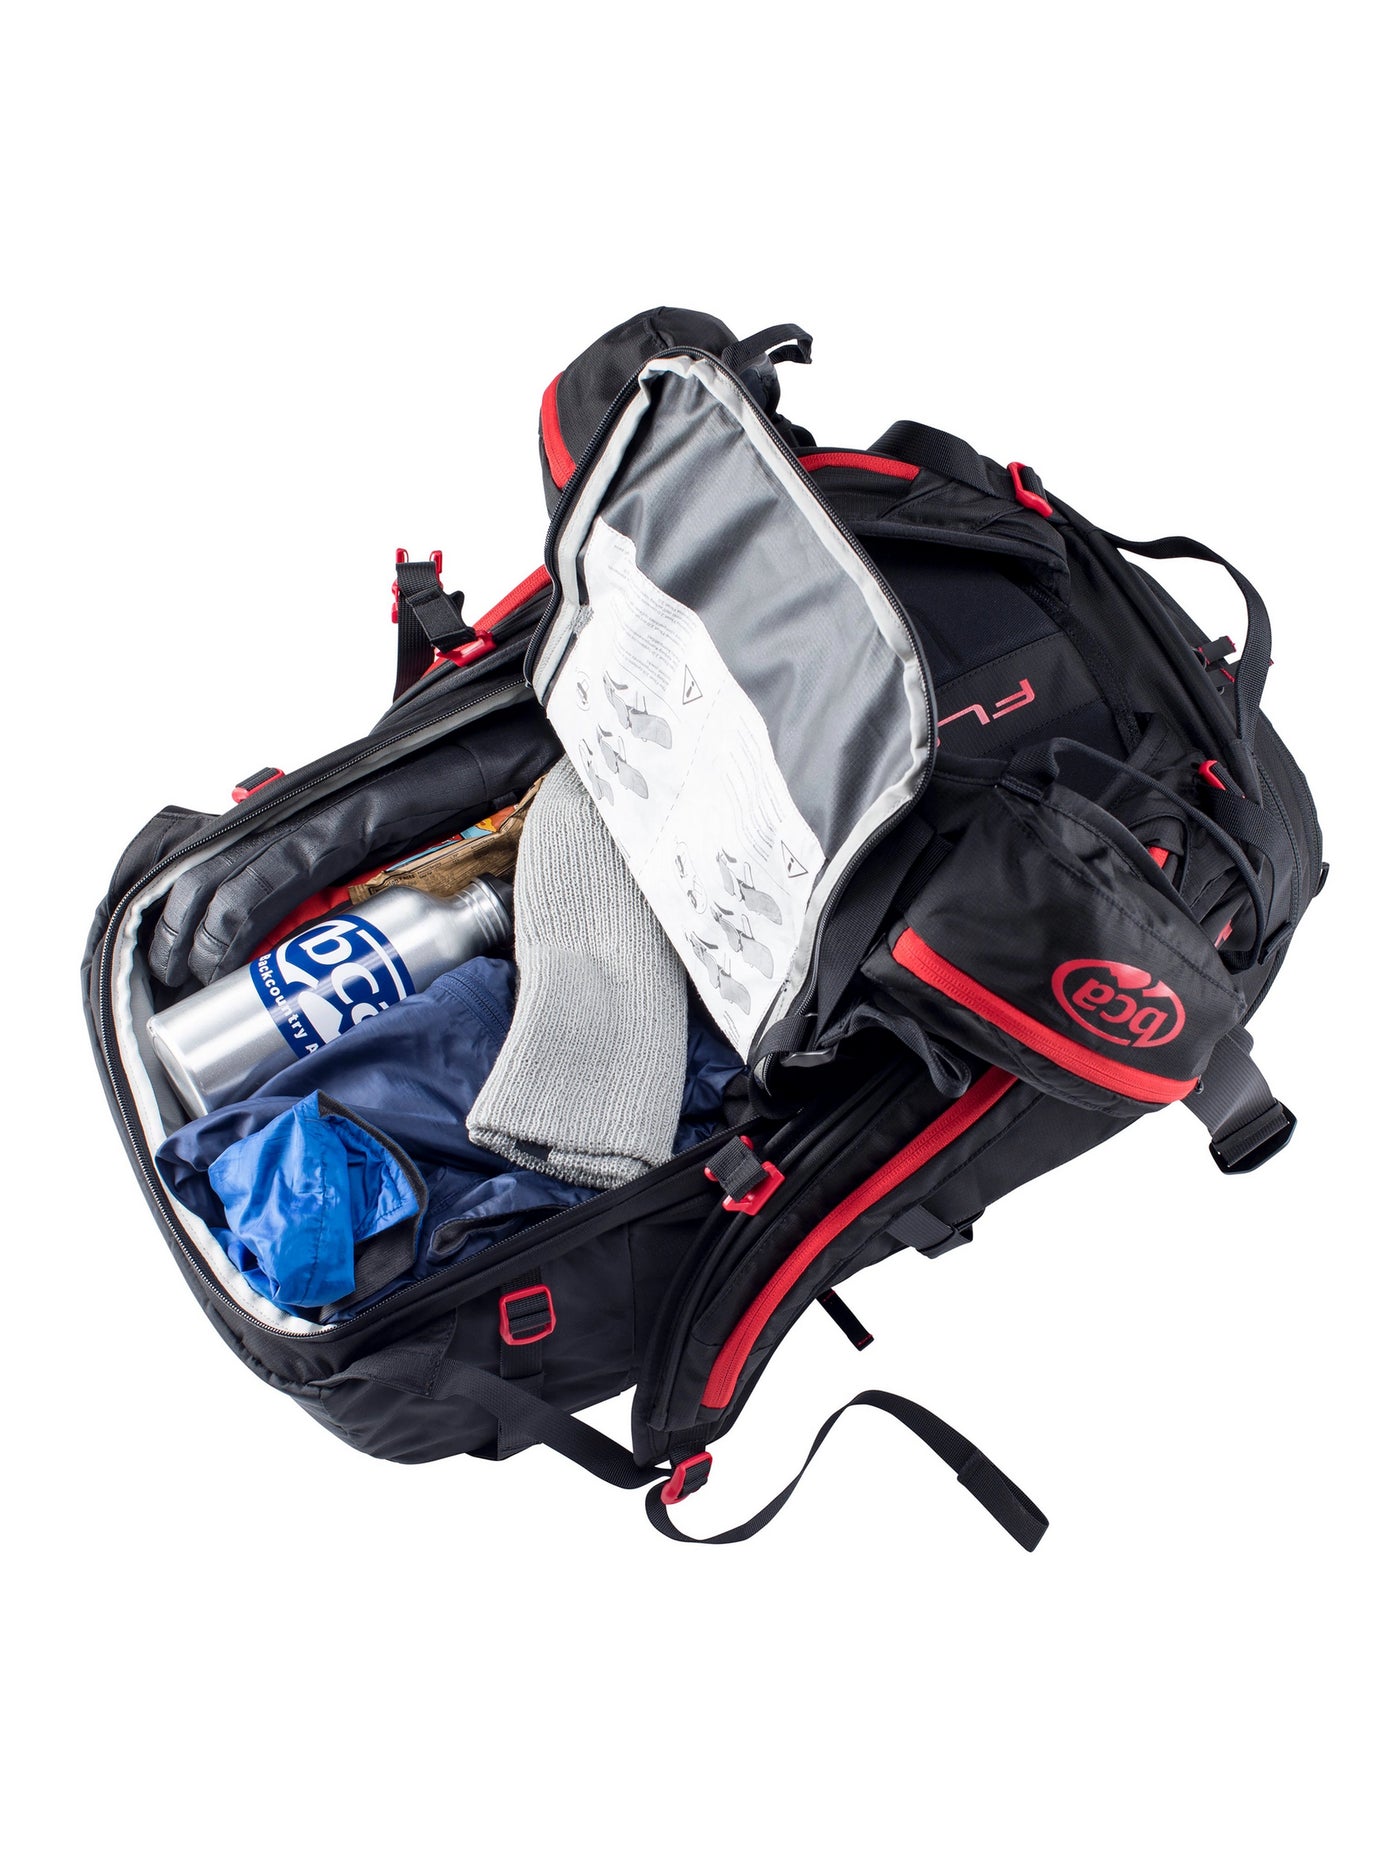 BCA FLOAT 42™ AVALANCHE AIRBAG 2.0